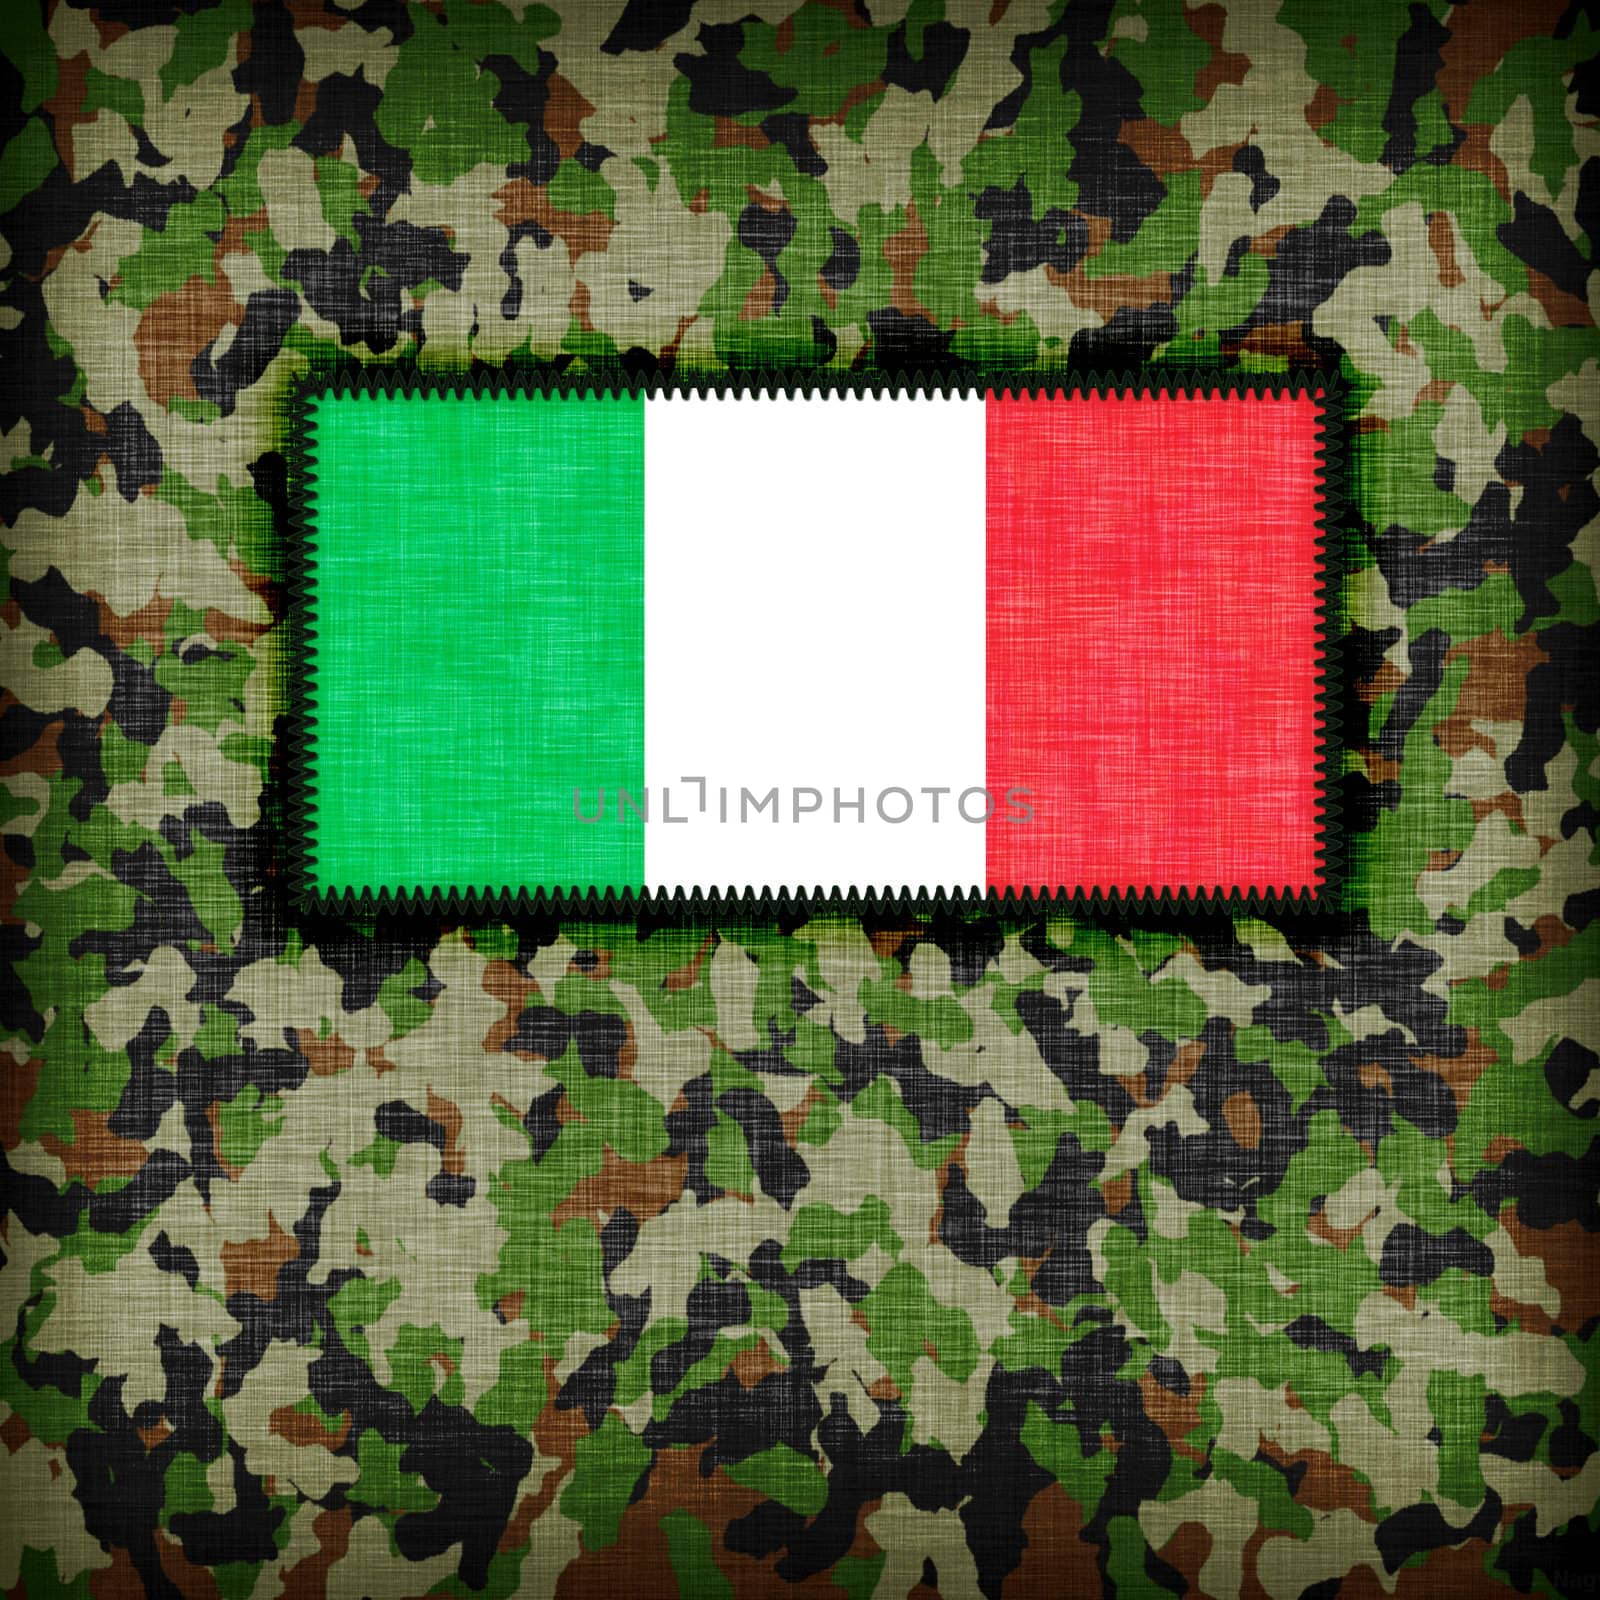 Amy camouflage uniform, Italy by michaklootwijk